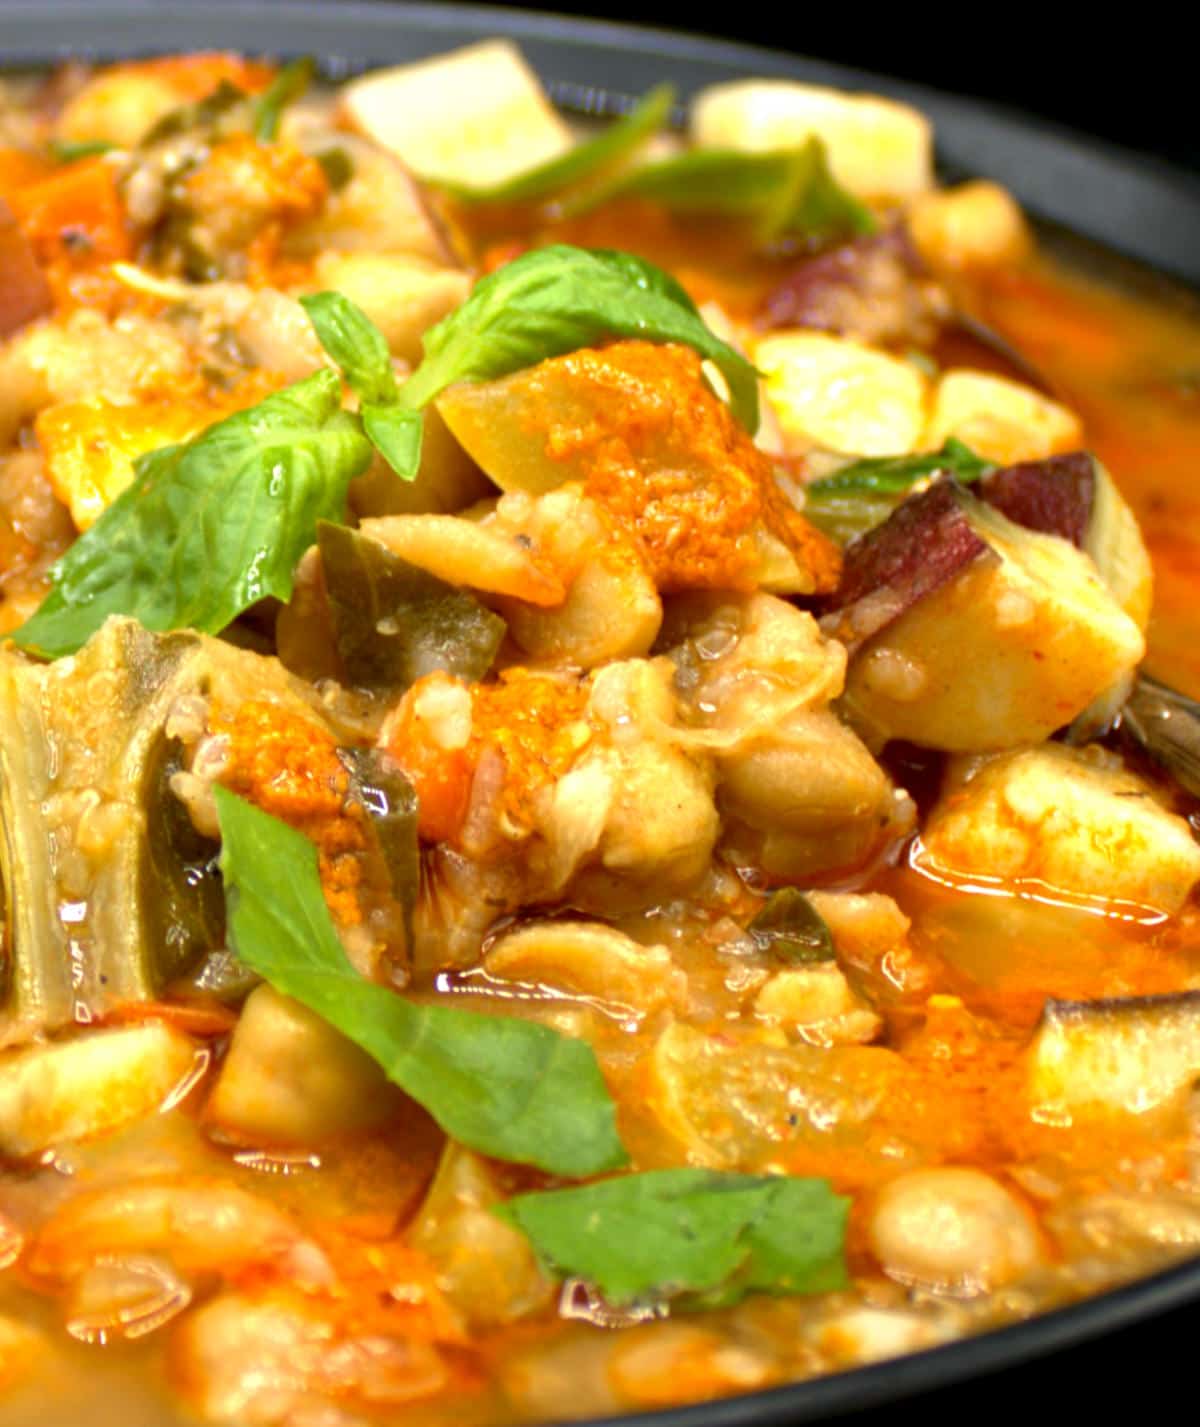 Vegetable stew with basil in bowl.